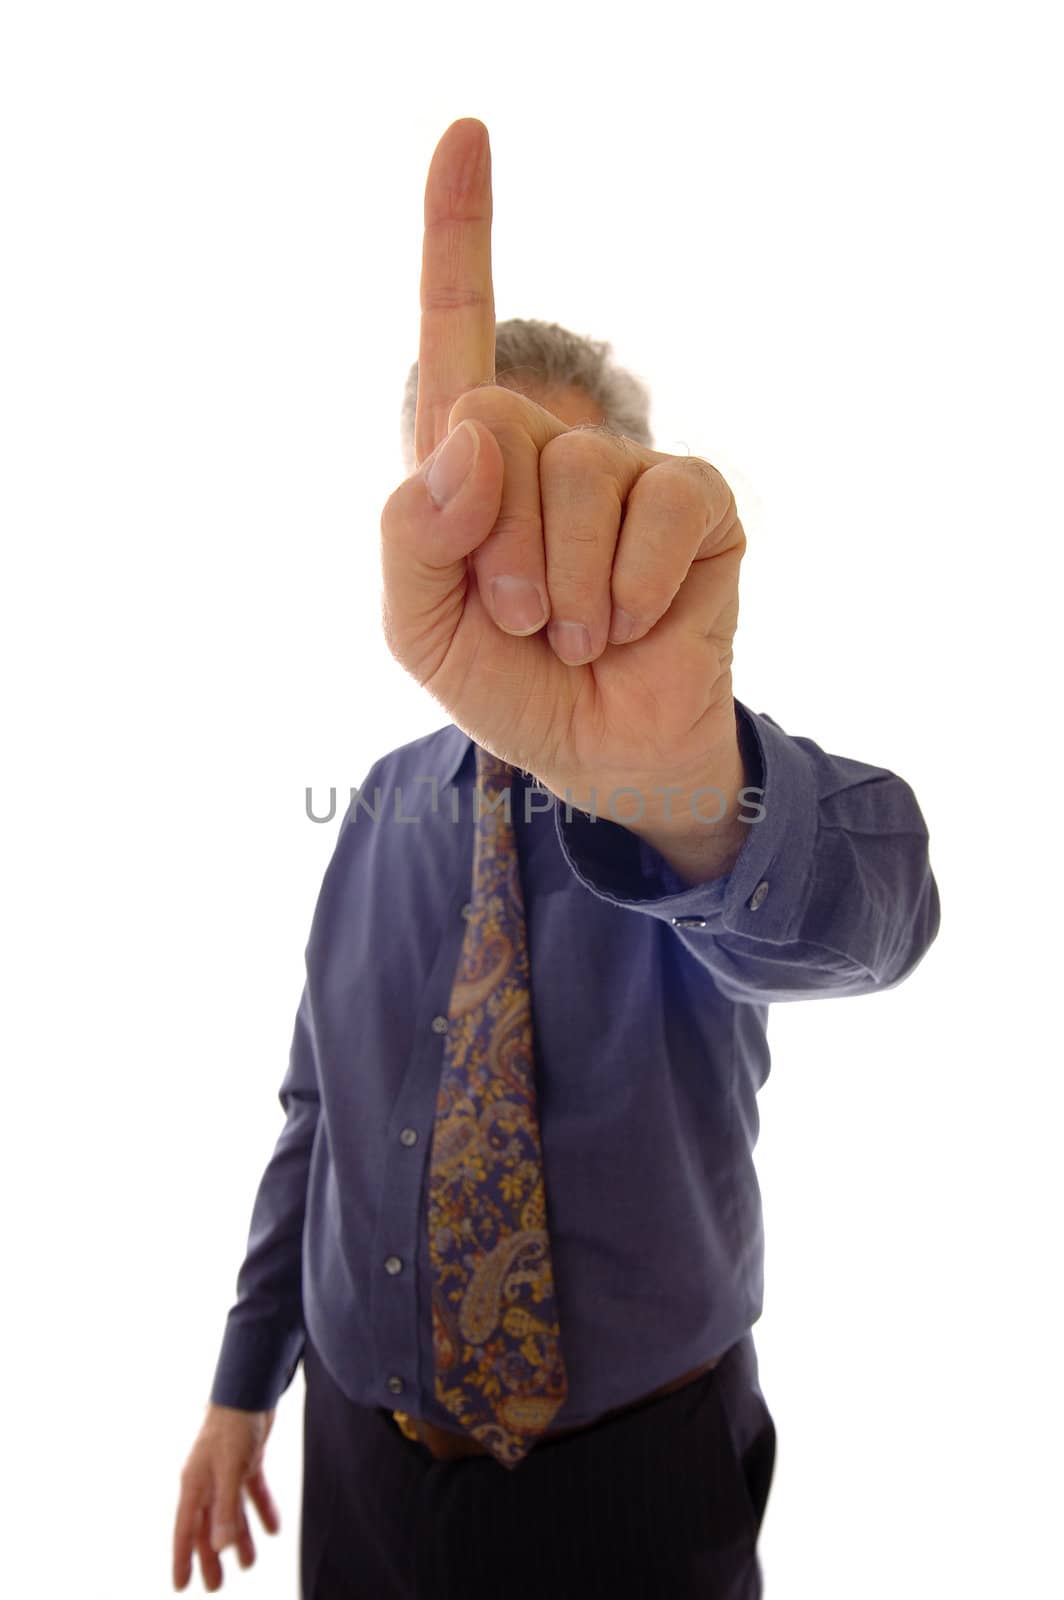 A senior businessman, in shirtsleeves, indicating 'one' with his finger. (Could also be a signal for 'quiet')